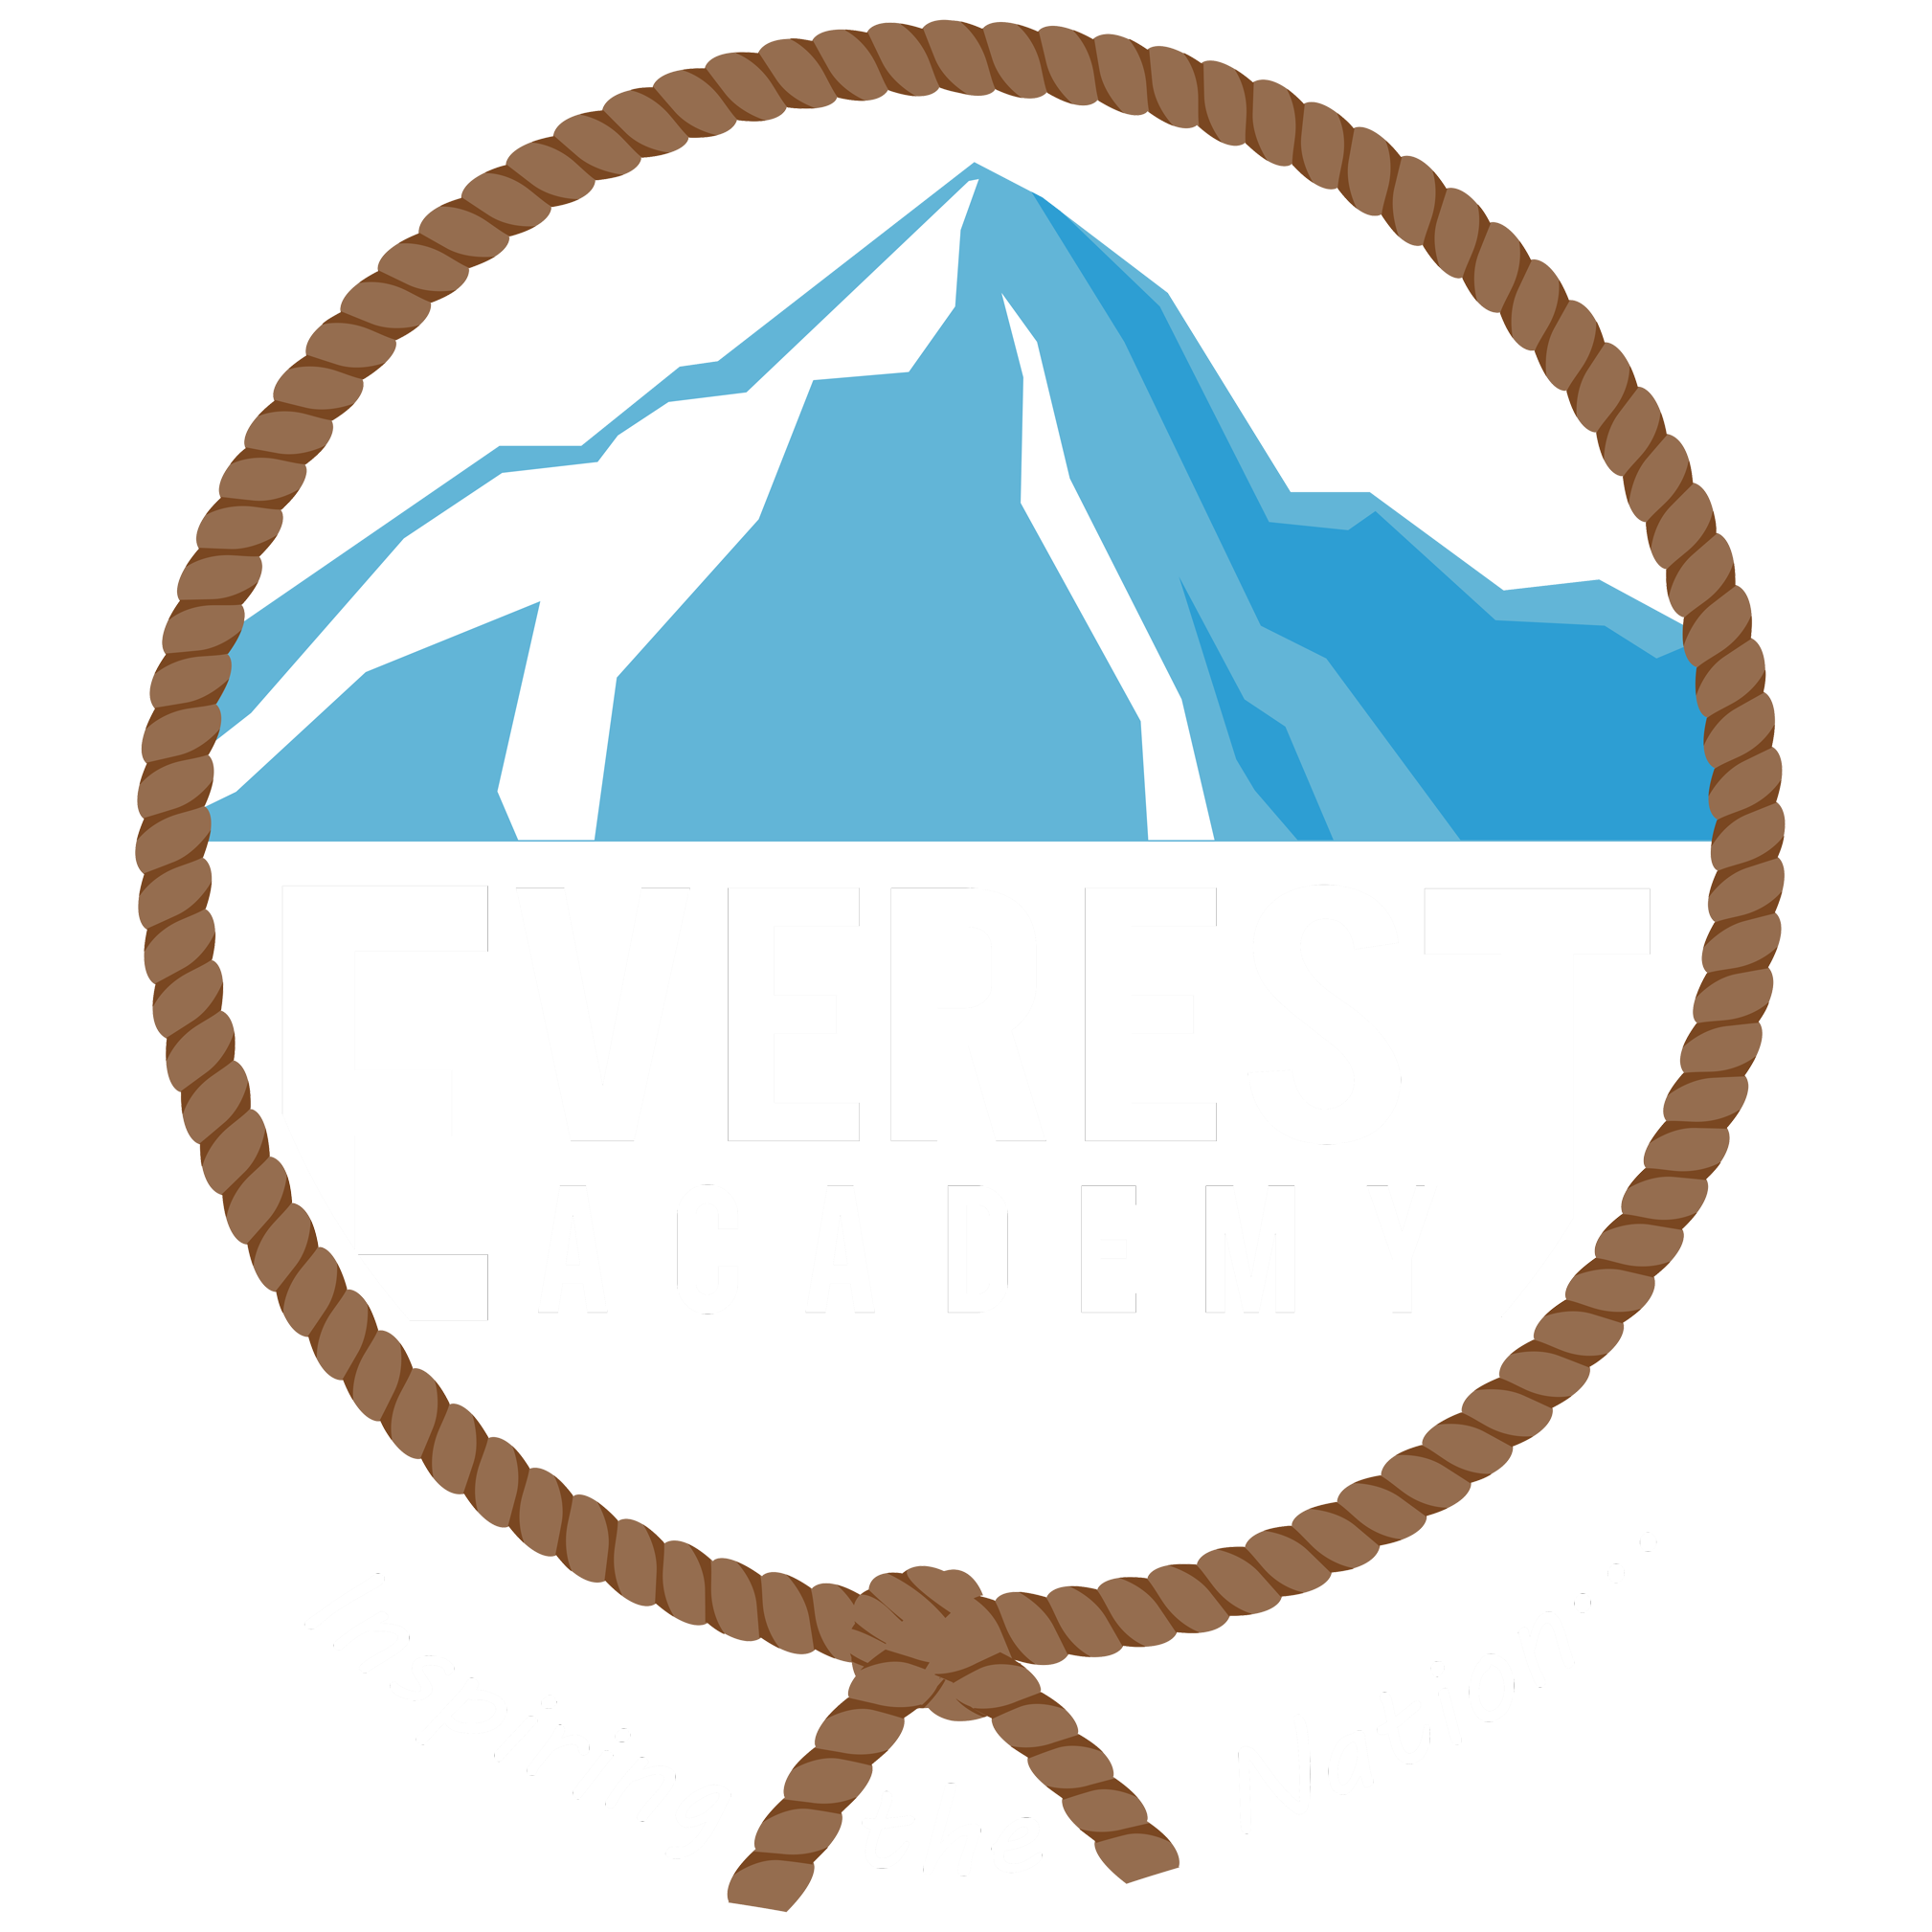 Find the best website to find cougars - Everest Academy